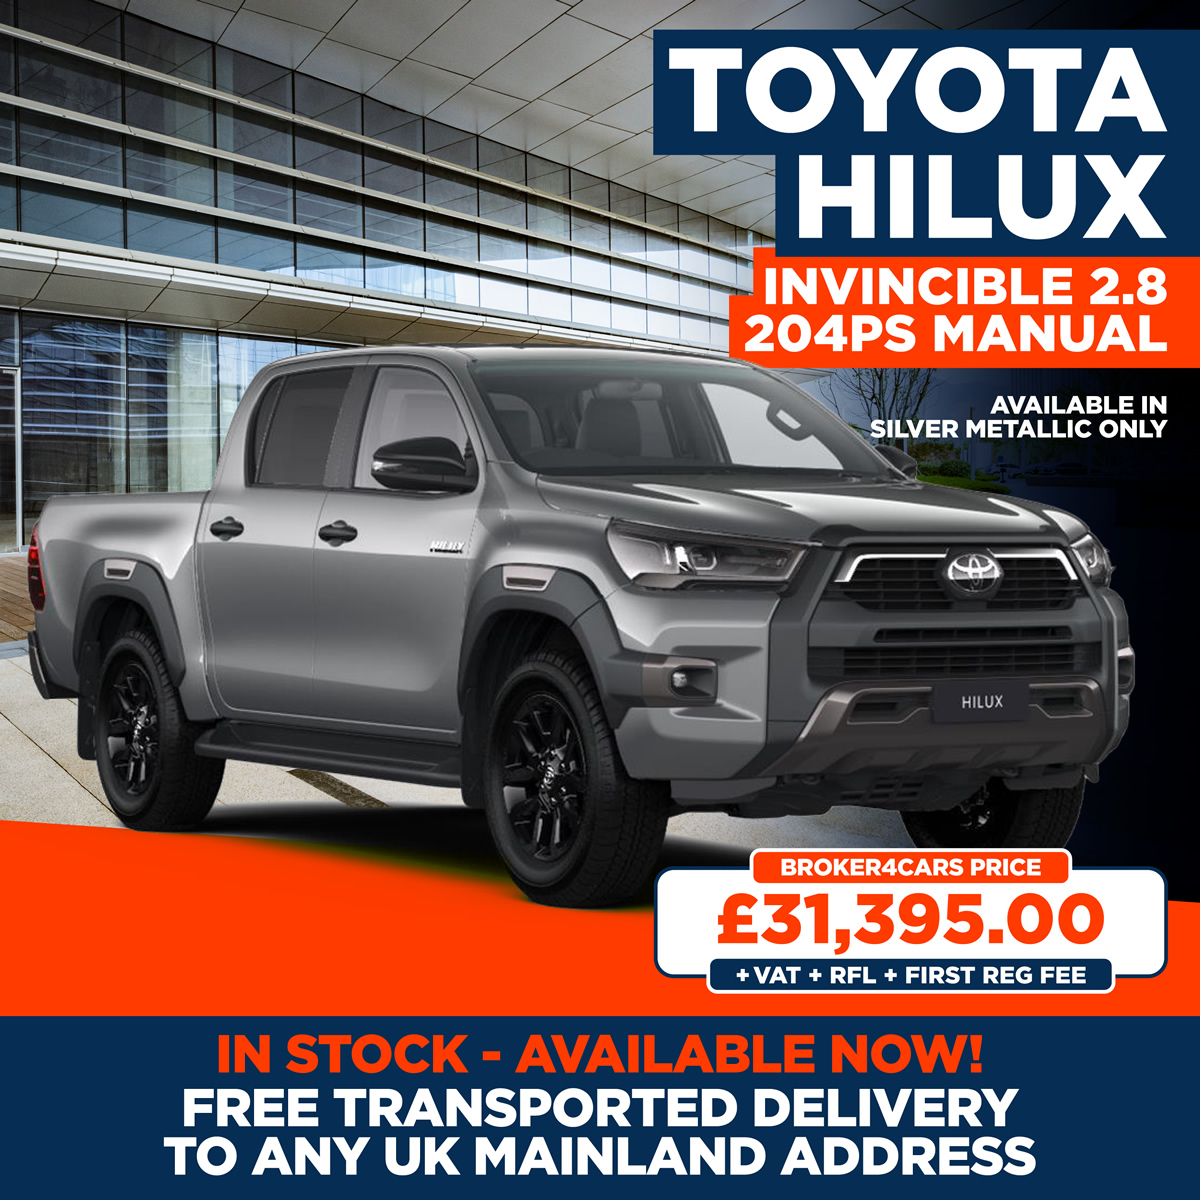 Toyota Hilux Invincible 2.8 204PS Manual. Available in Silver Metallic Only. In stock - available now. Free transported delivery to any uk mainland address. Broker4Cars Price £31,395 OTR